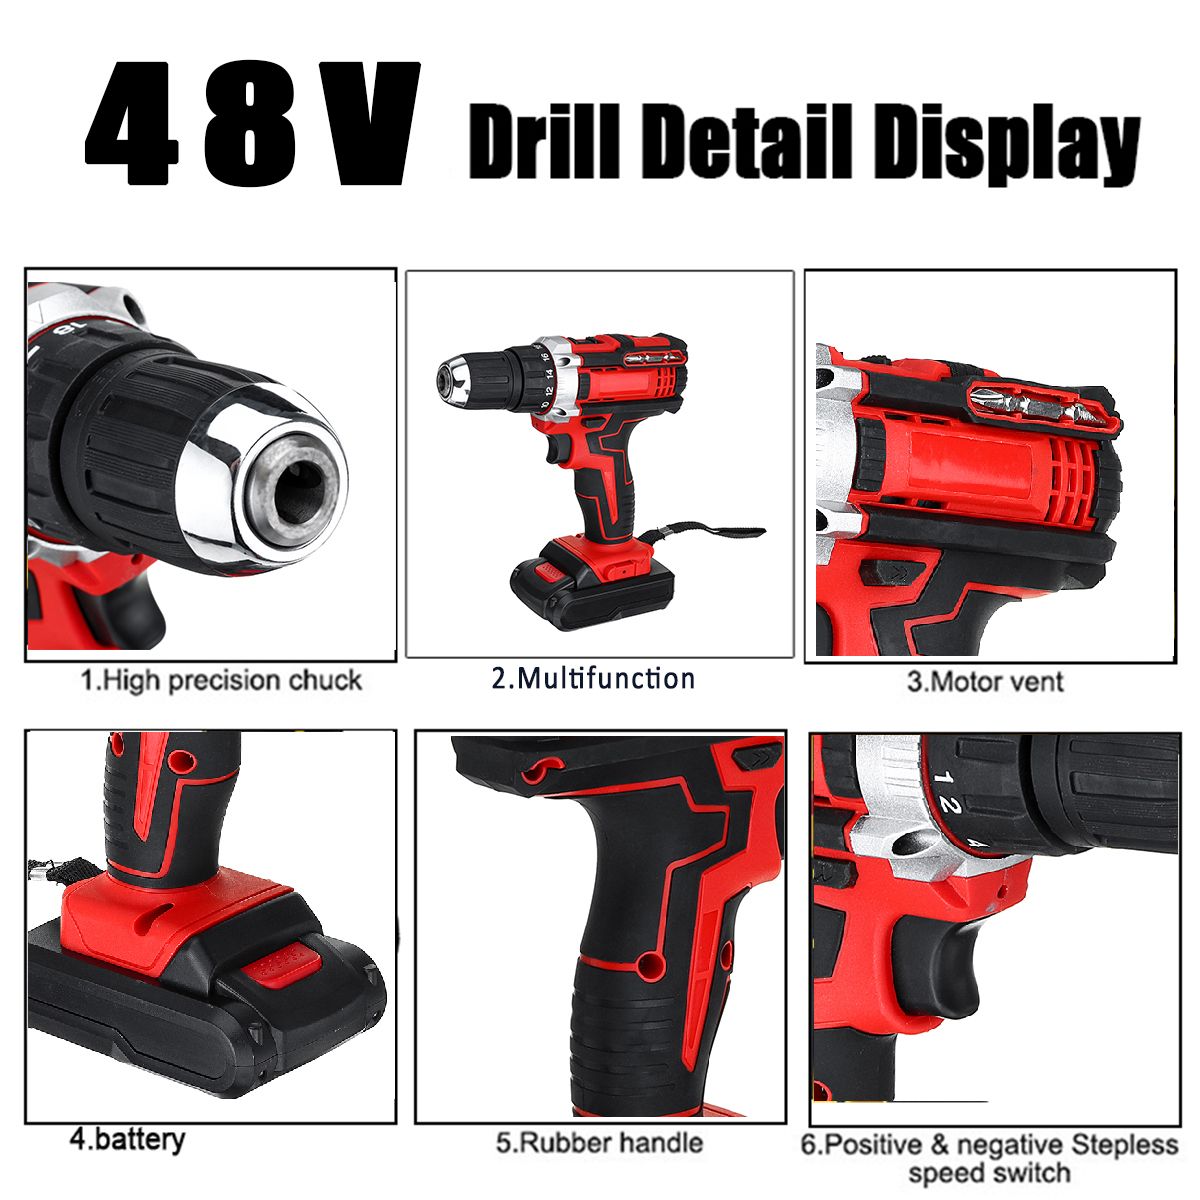 48V-50-60Hz-Electric-Drill-18-Gear-Torque-Power-Drills-ForwardReverse-Switch-25-28Nm-Drilling-Tool-1599139